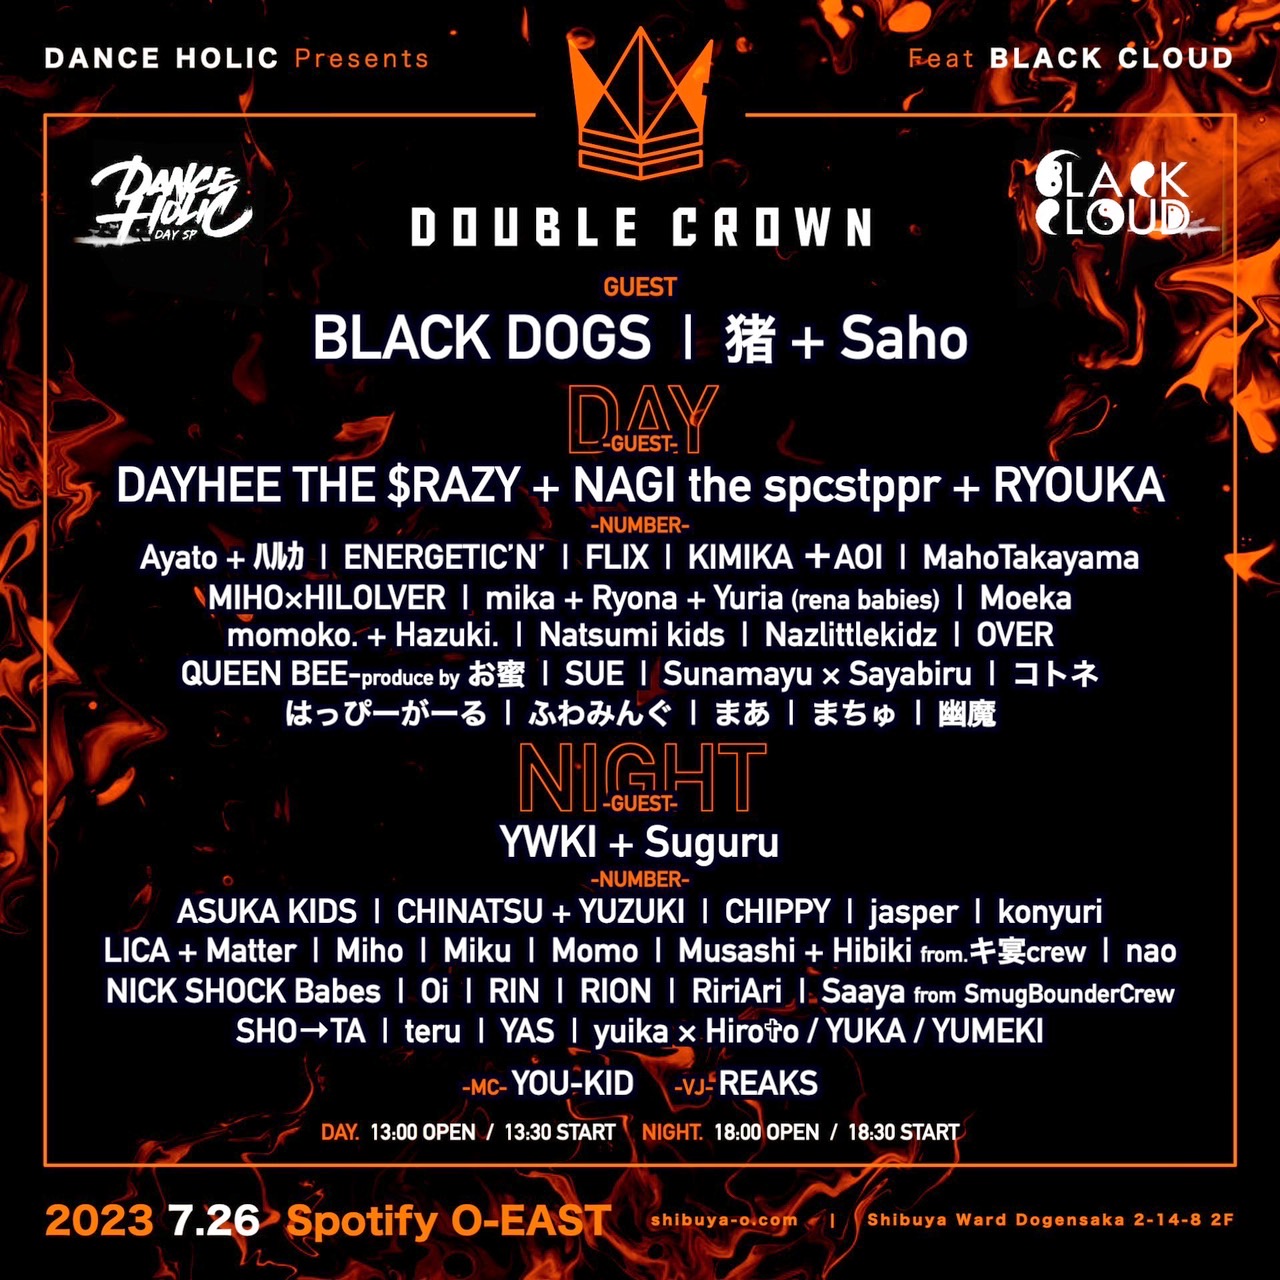 DANCE HOLIC presents, feat BLACK CLOUD DOUBLE CROWN -DAY-